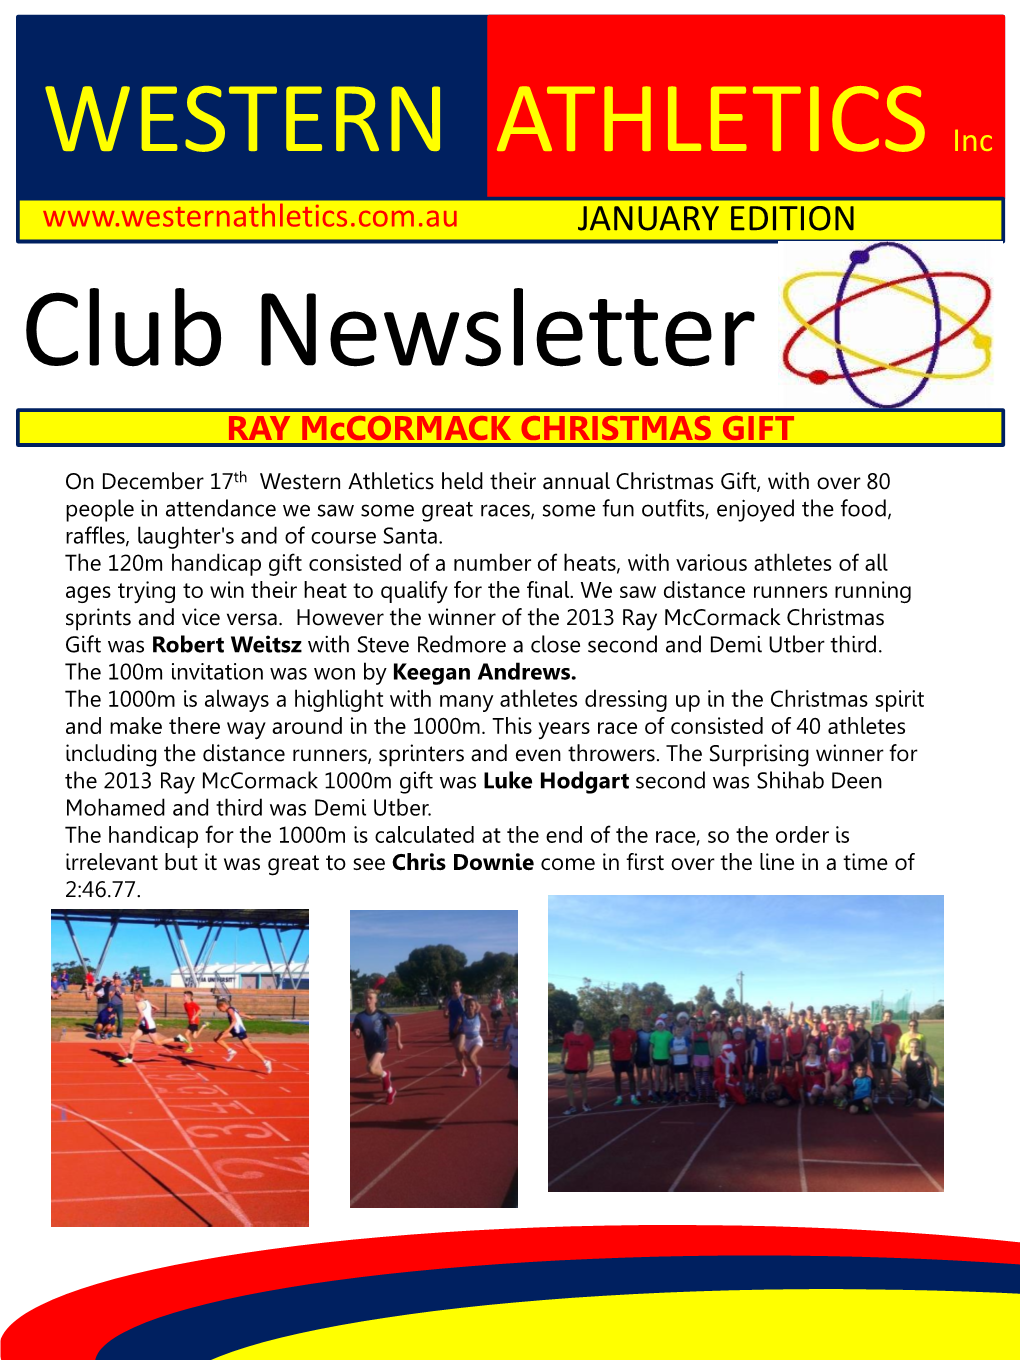 Club Newsletter RAY Mccormack CHRISTMAS GIFT